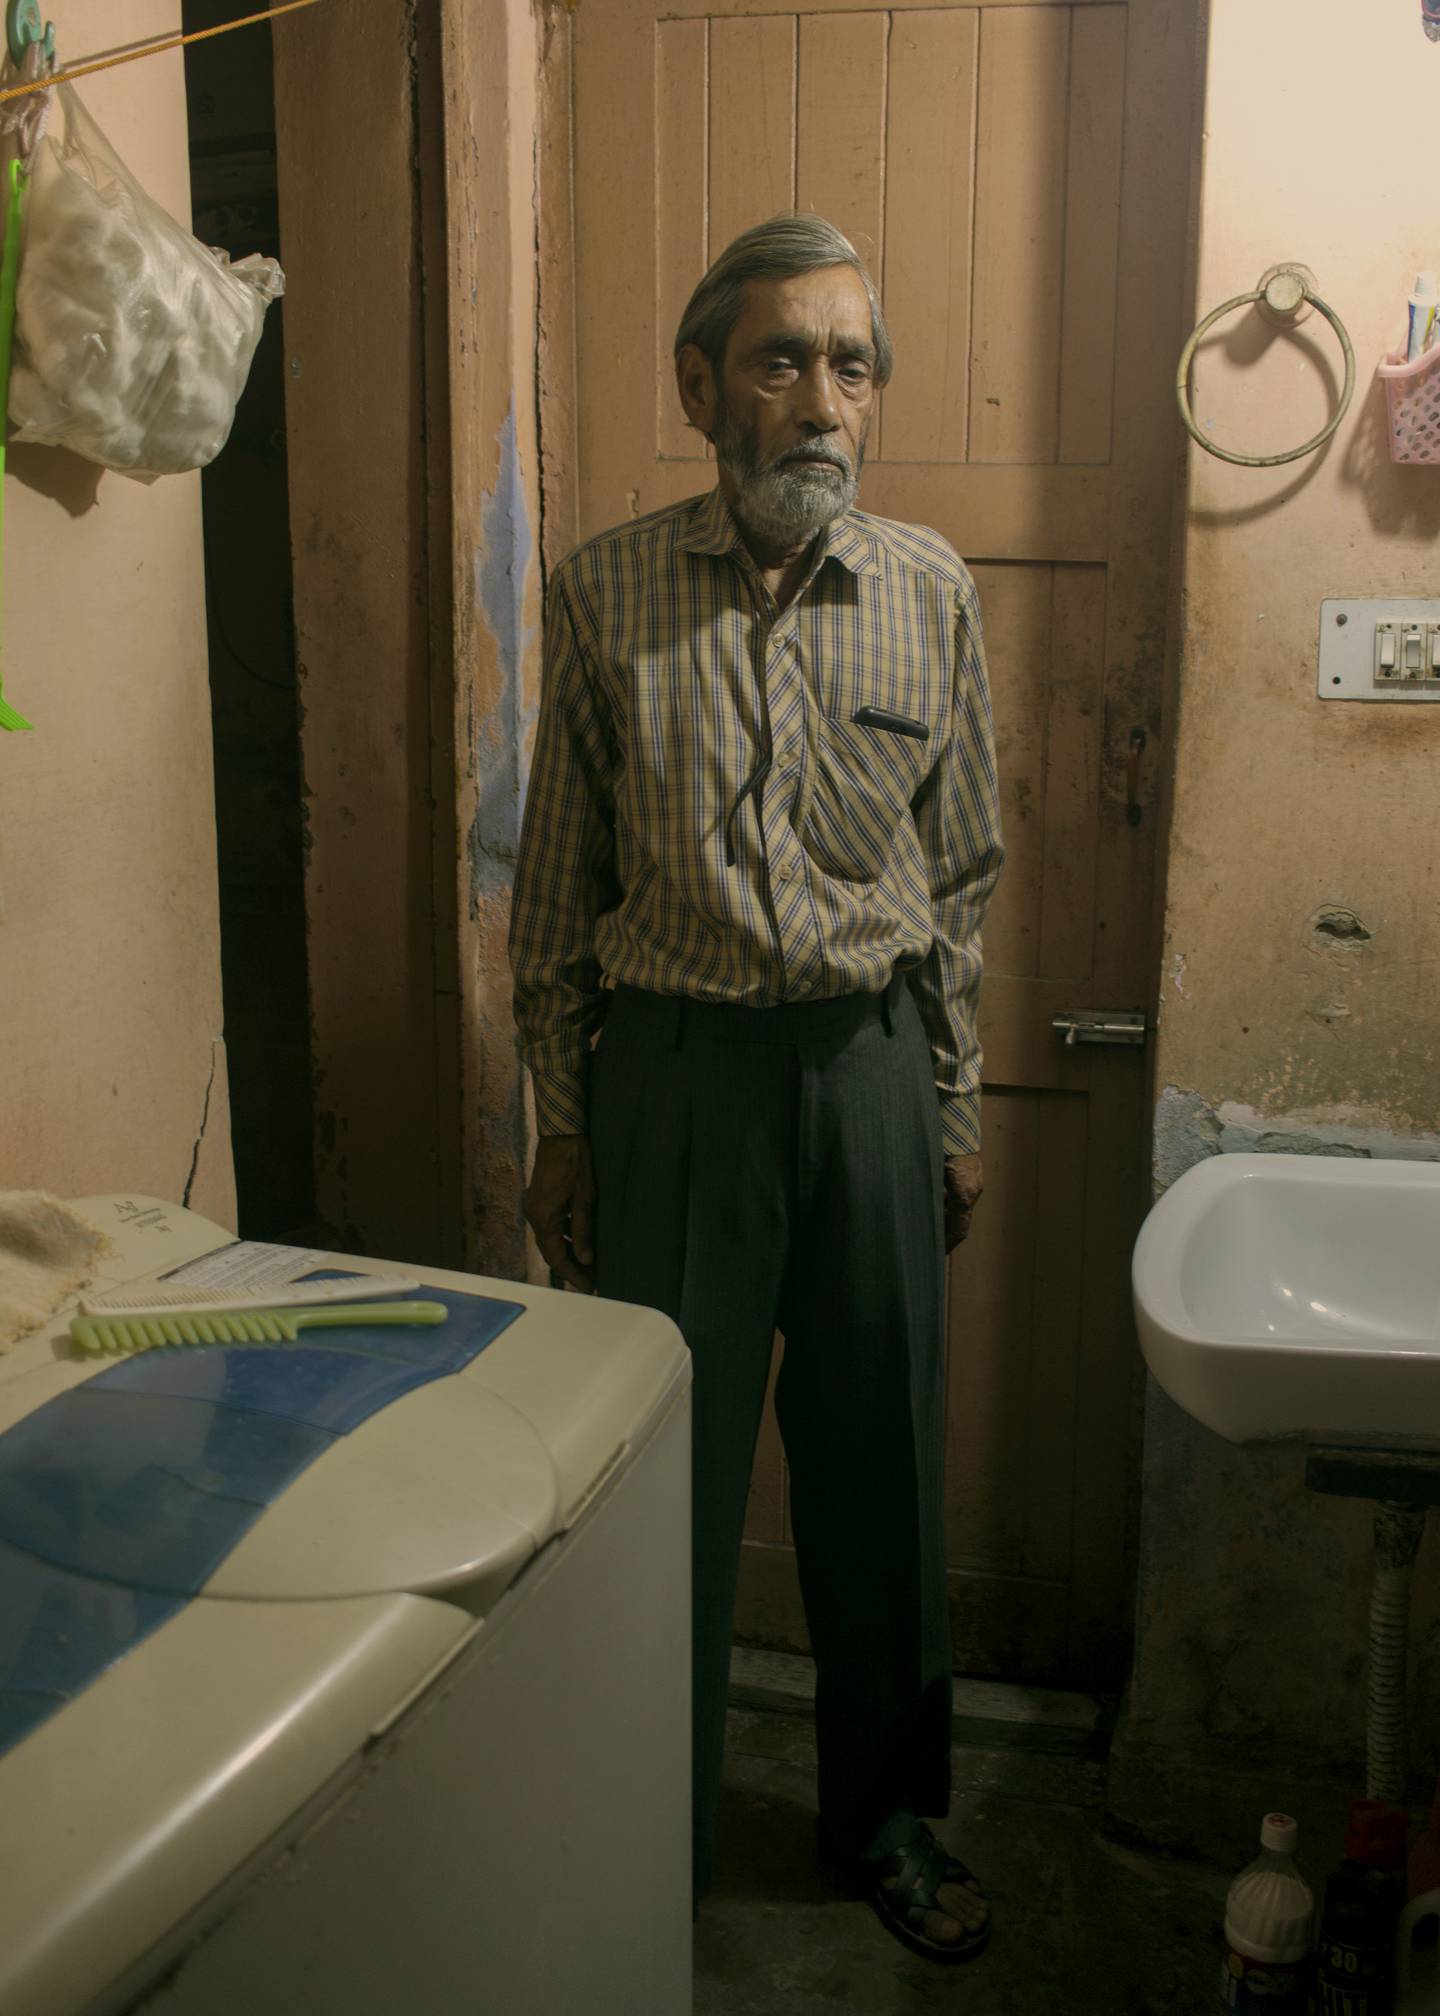 Devashish Gaur was selected as winner of the experimental photography award for his six-part photo series 'This is the Closest We Will Get'. Photo: Sharjah Art Foundation